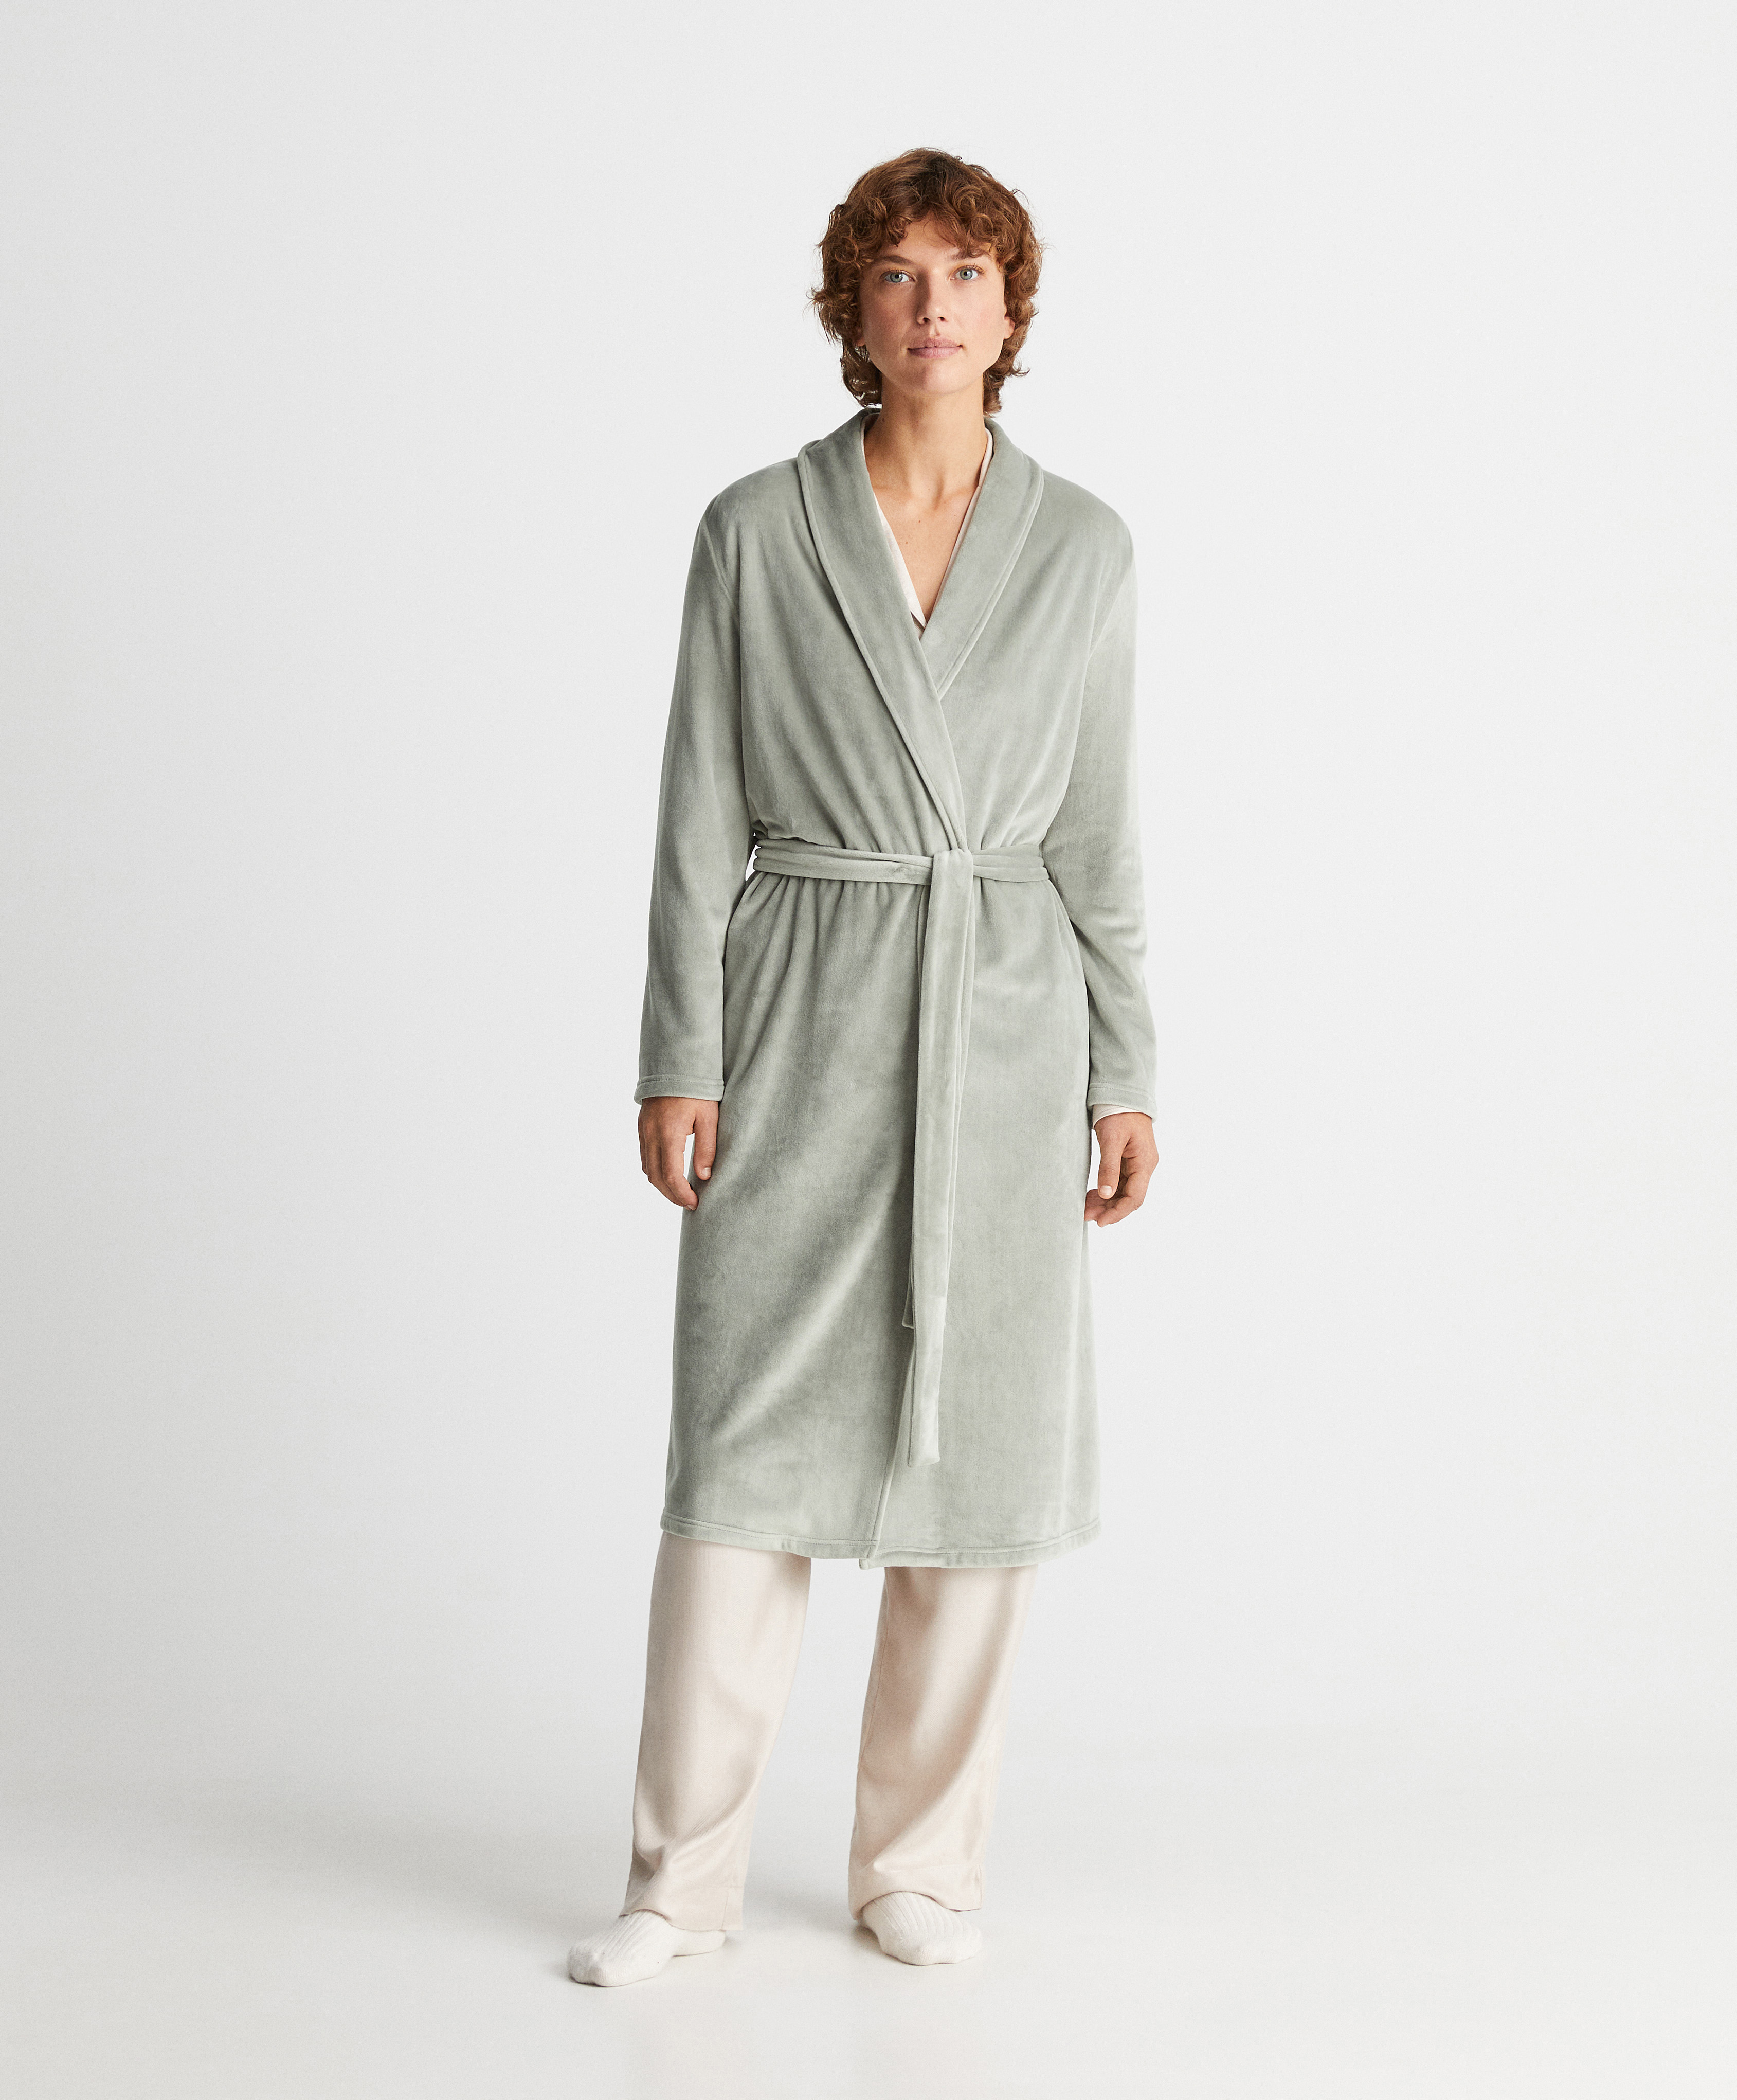 Soft touch velour dressing gown - Dressing gowns - Sleep | OYSHO United States